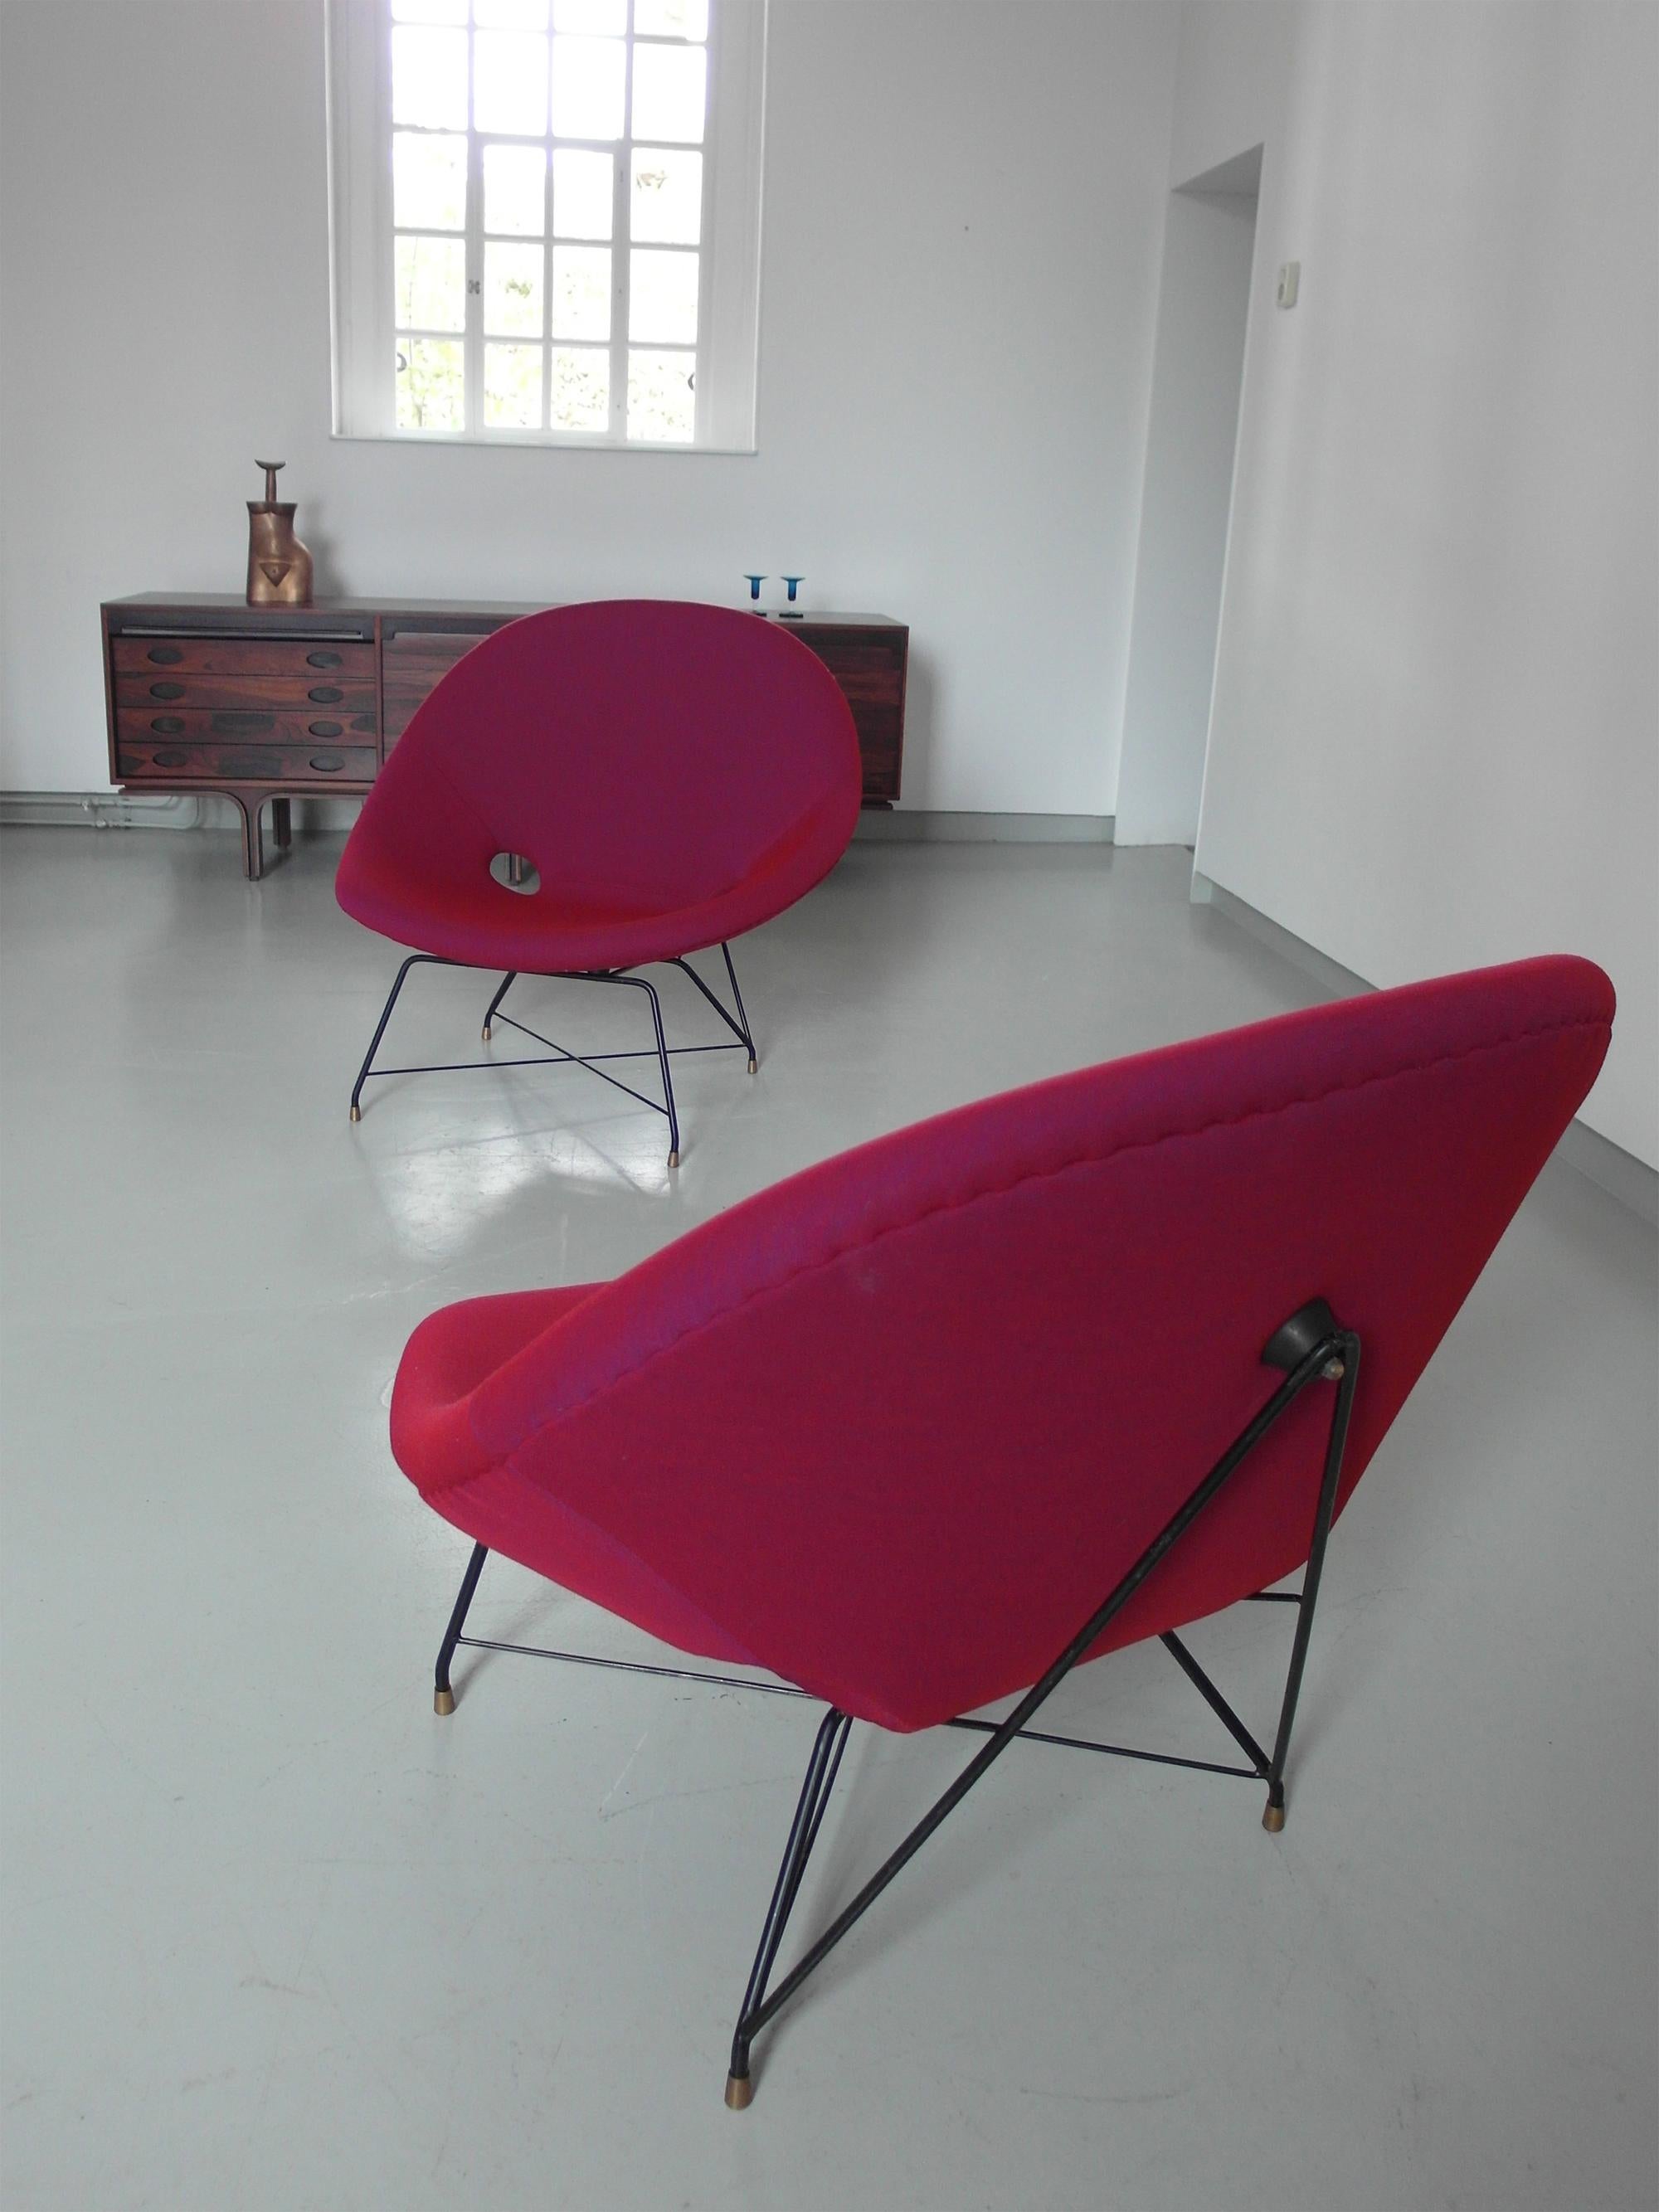 Pair of Cosmos Chairs in Ruby red/ Raspberry red by Augusto Bozzi for Saporiti For Sale 9